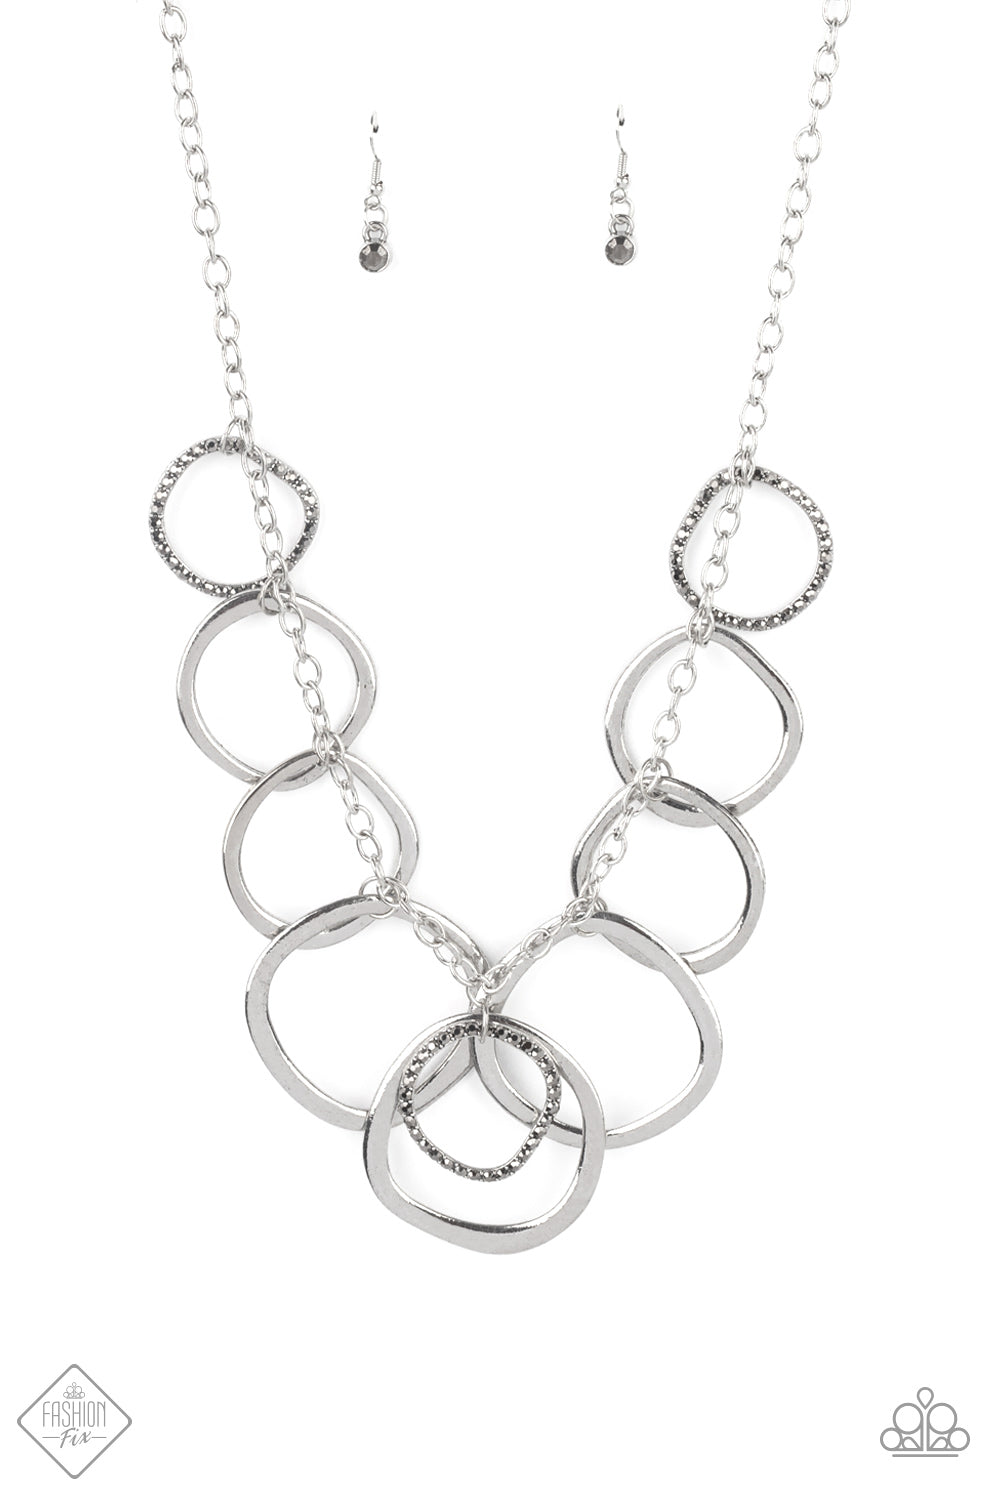 Dizzy With Desire Silver
Necklace - Daria's Blings N Things